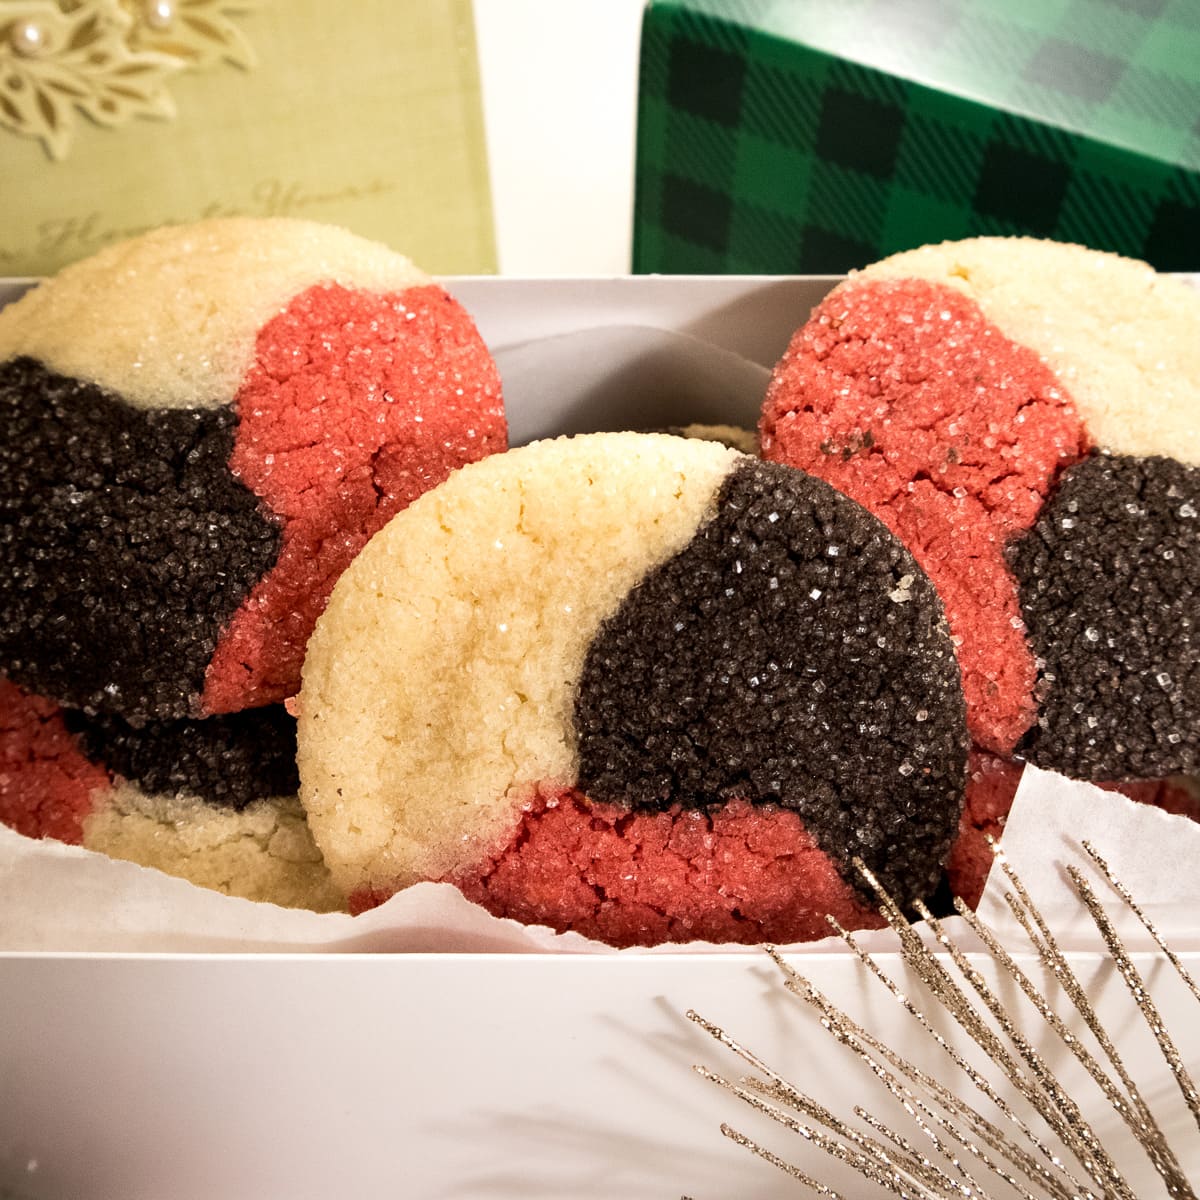 Three flavors in one cookie - Chocolate, Vanilla and Strawberry make up this Neapolitan Butter Cookie